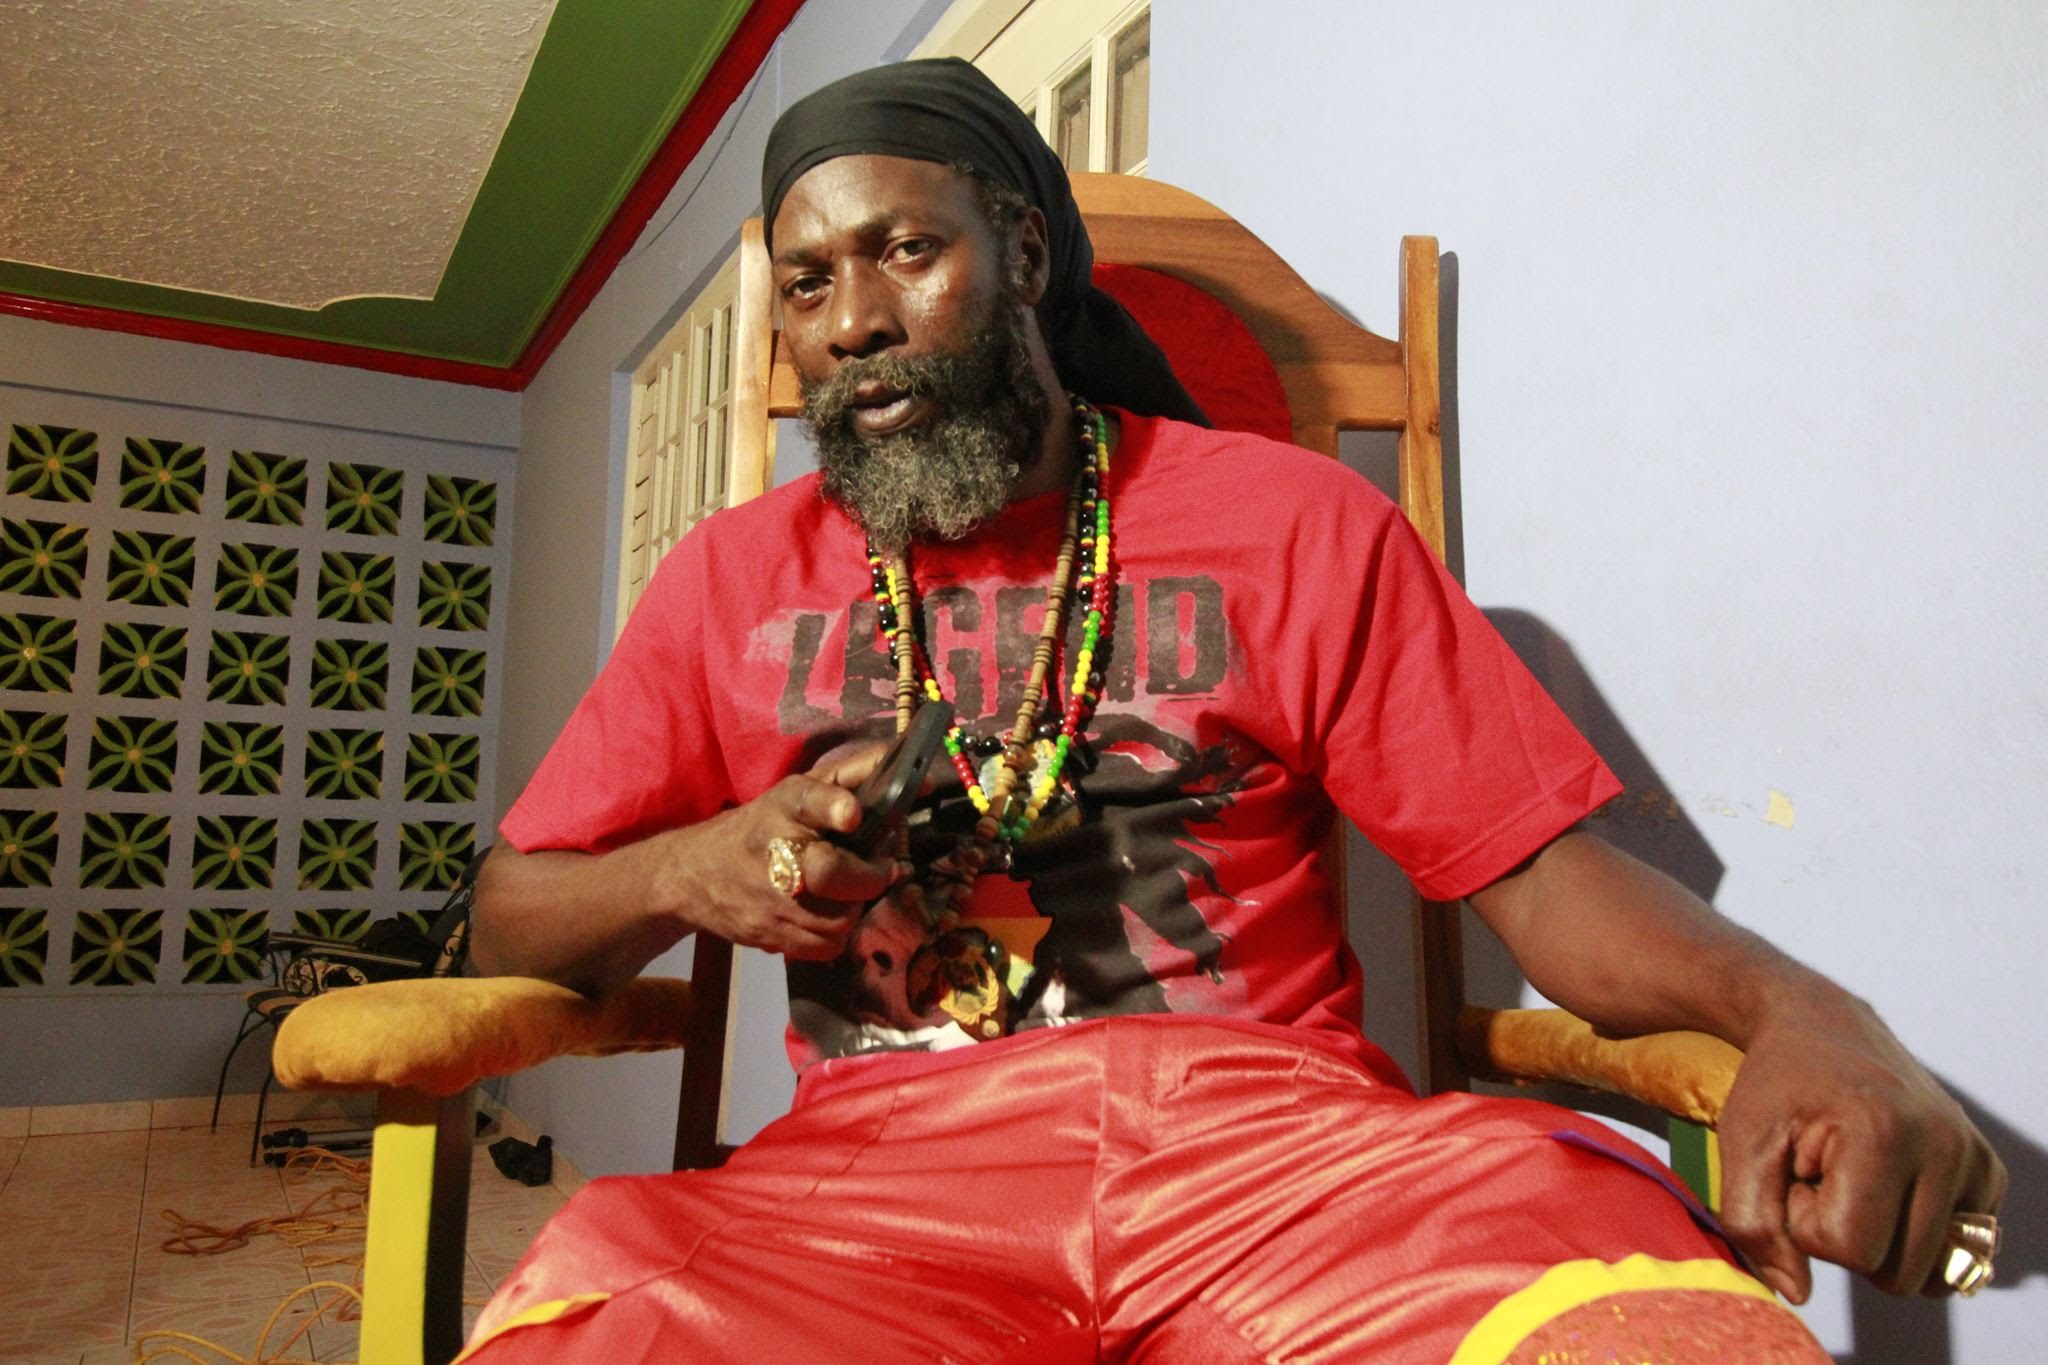 all sizzla songs